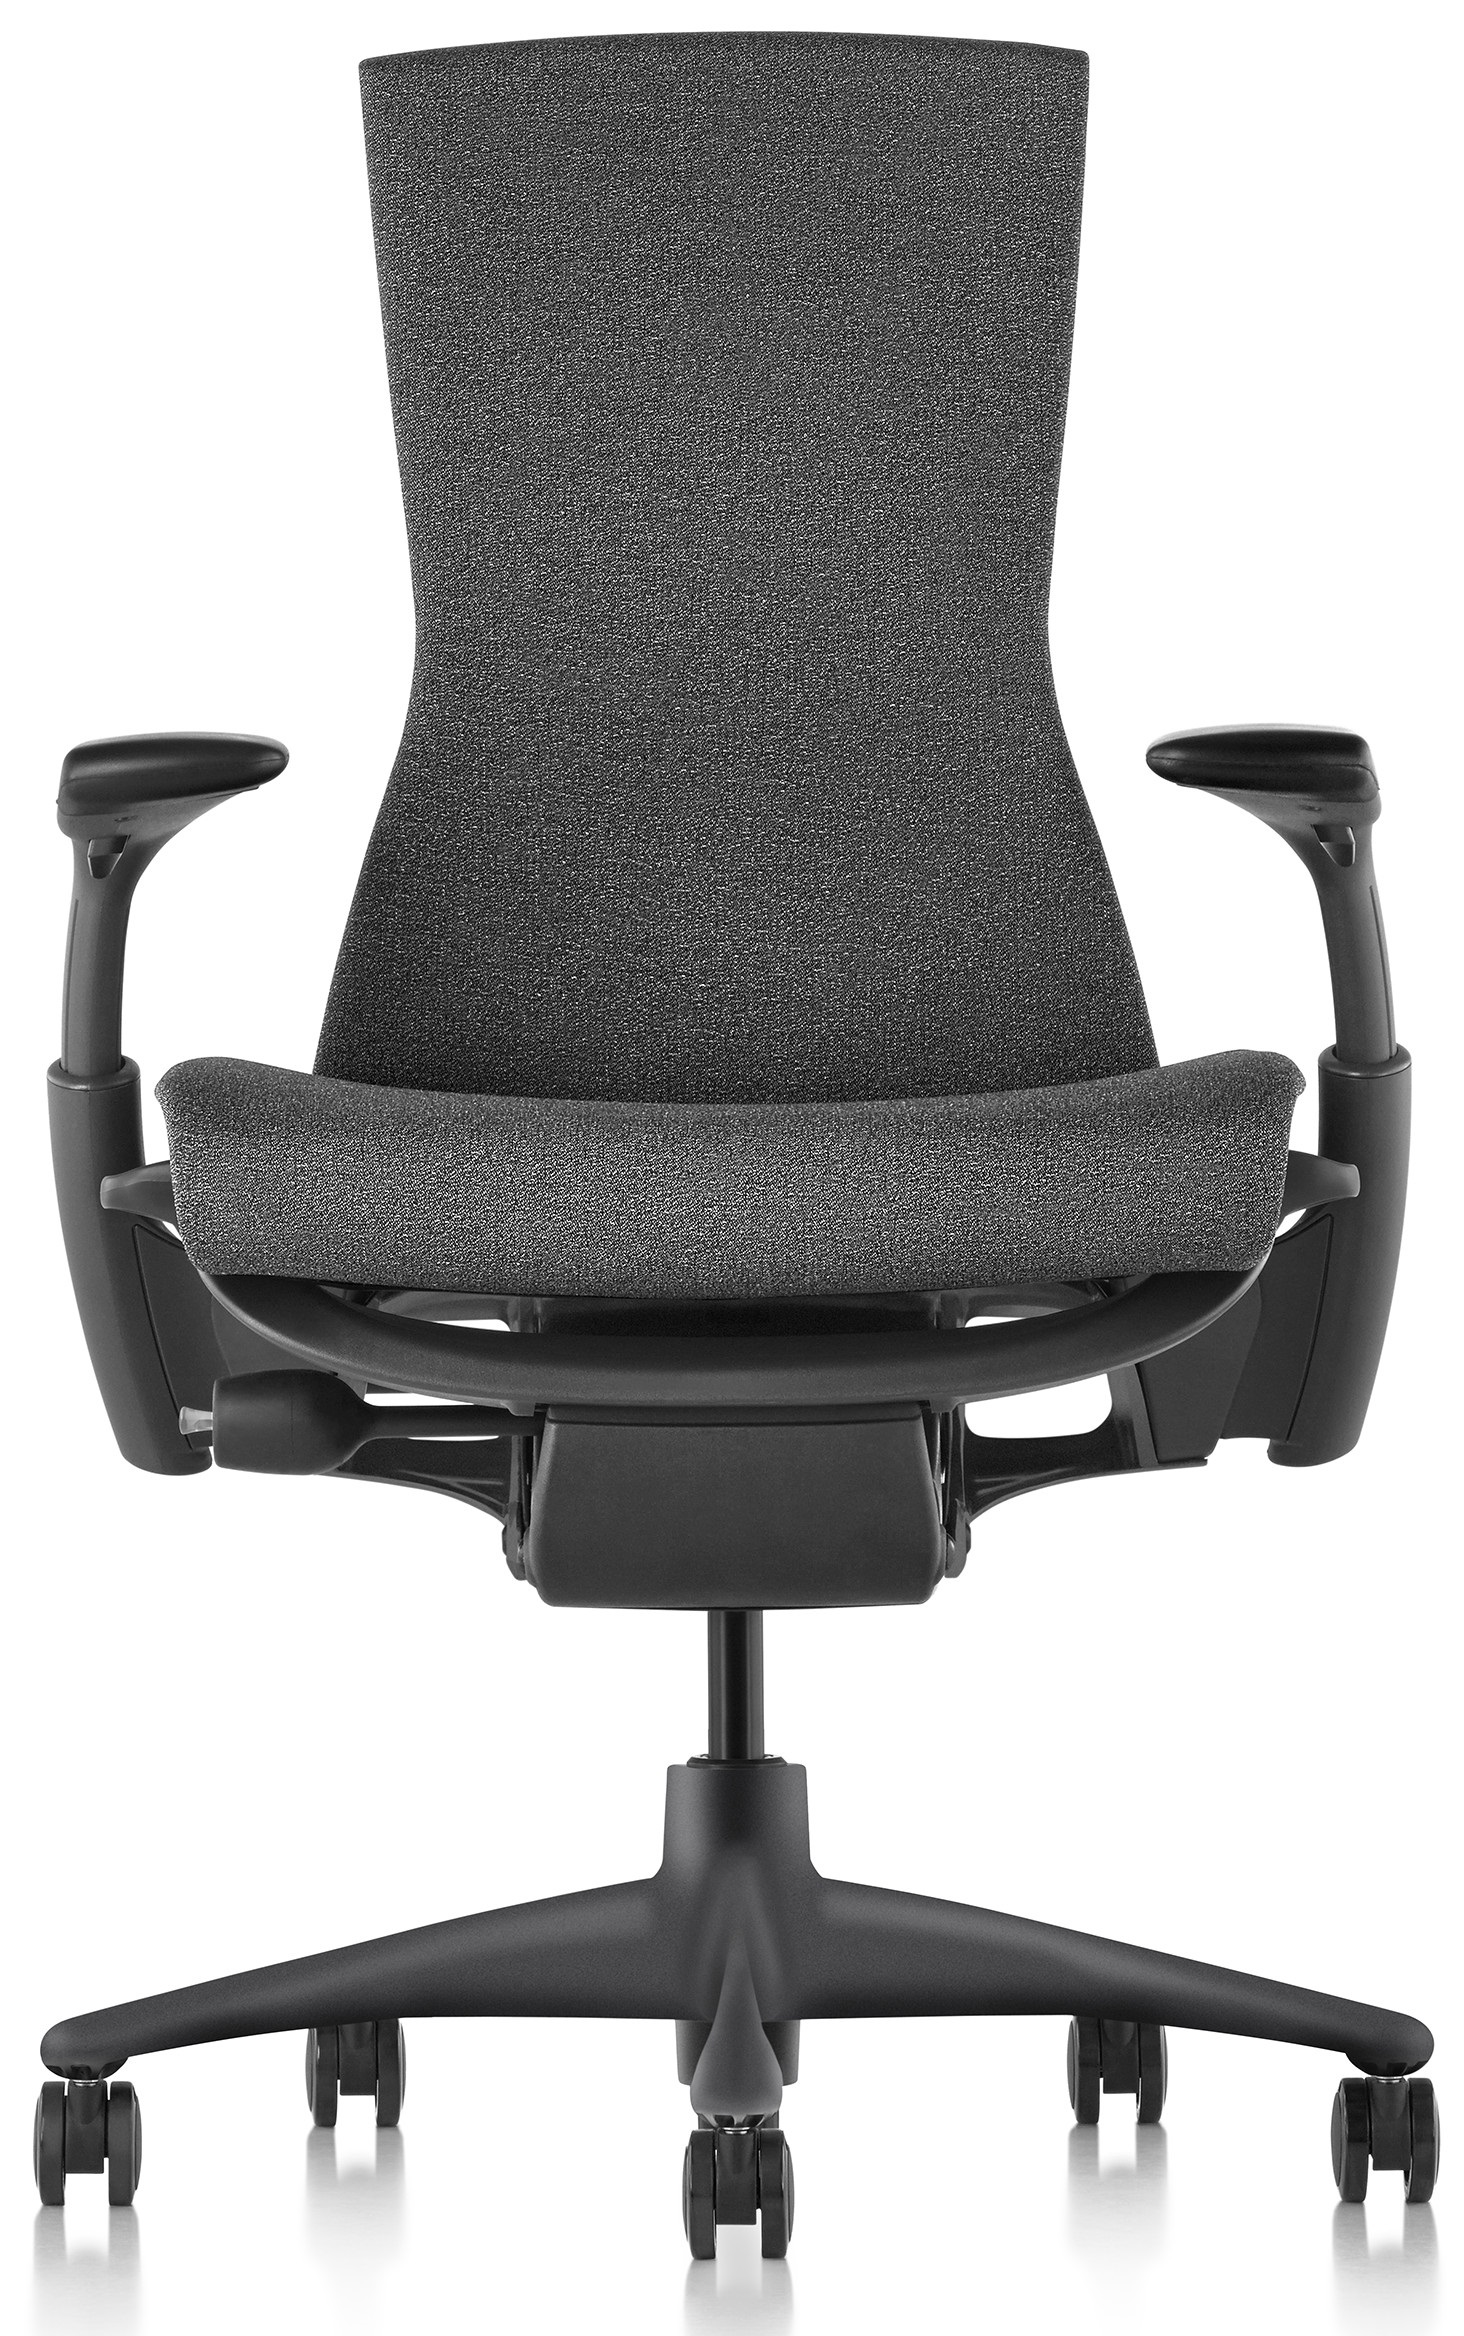 Best Ergonomic Office Chairs For Back Pain Relief